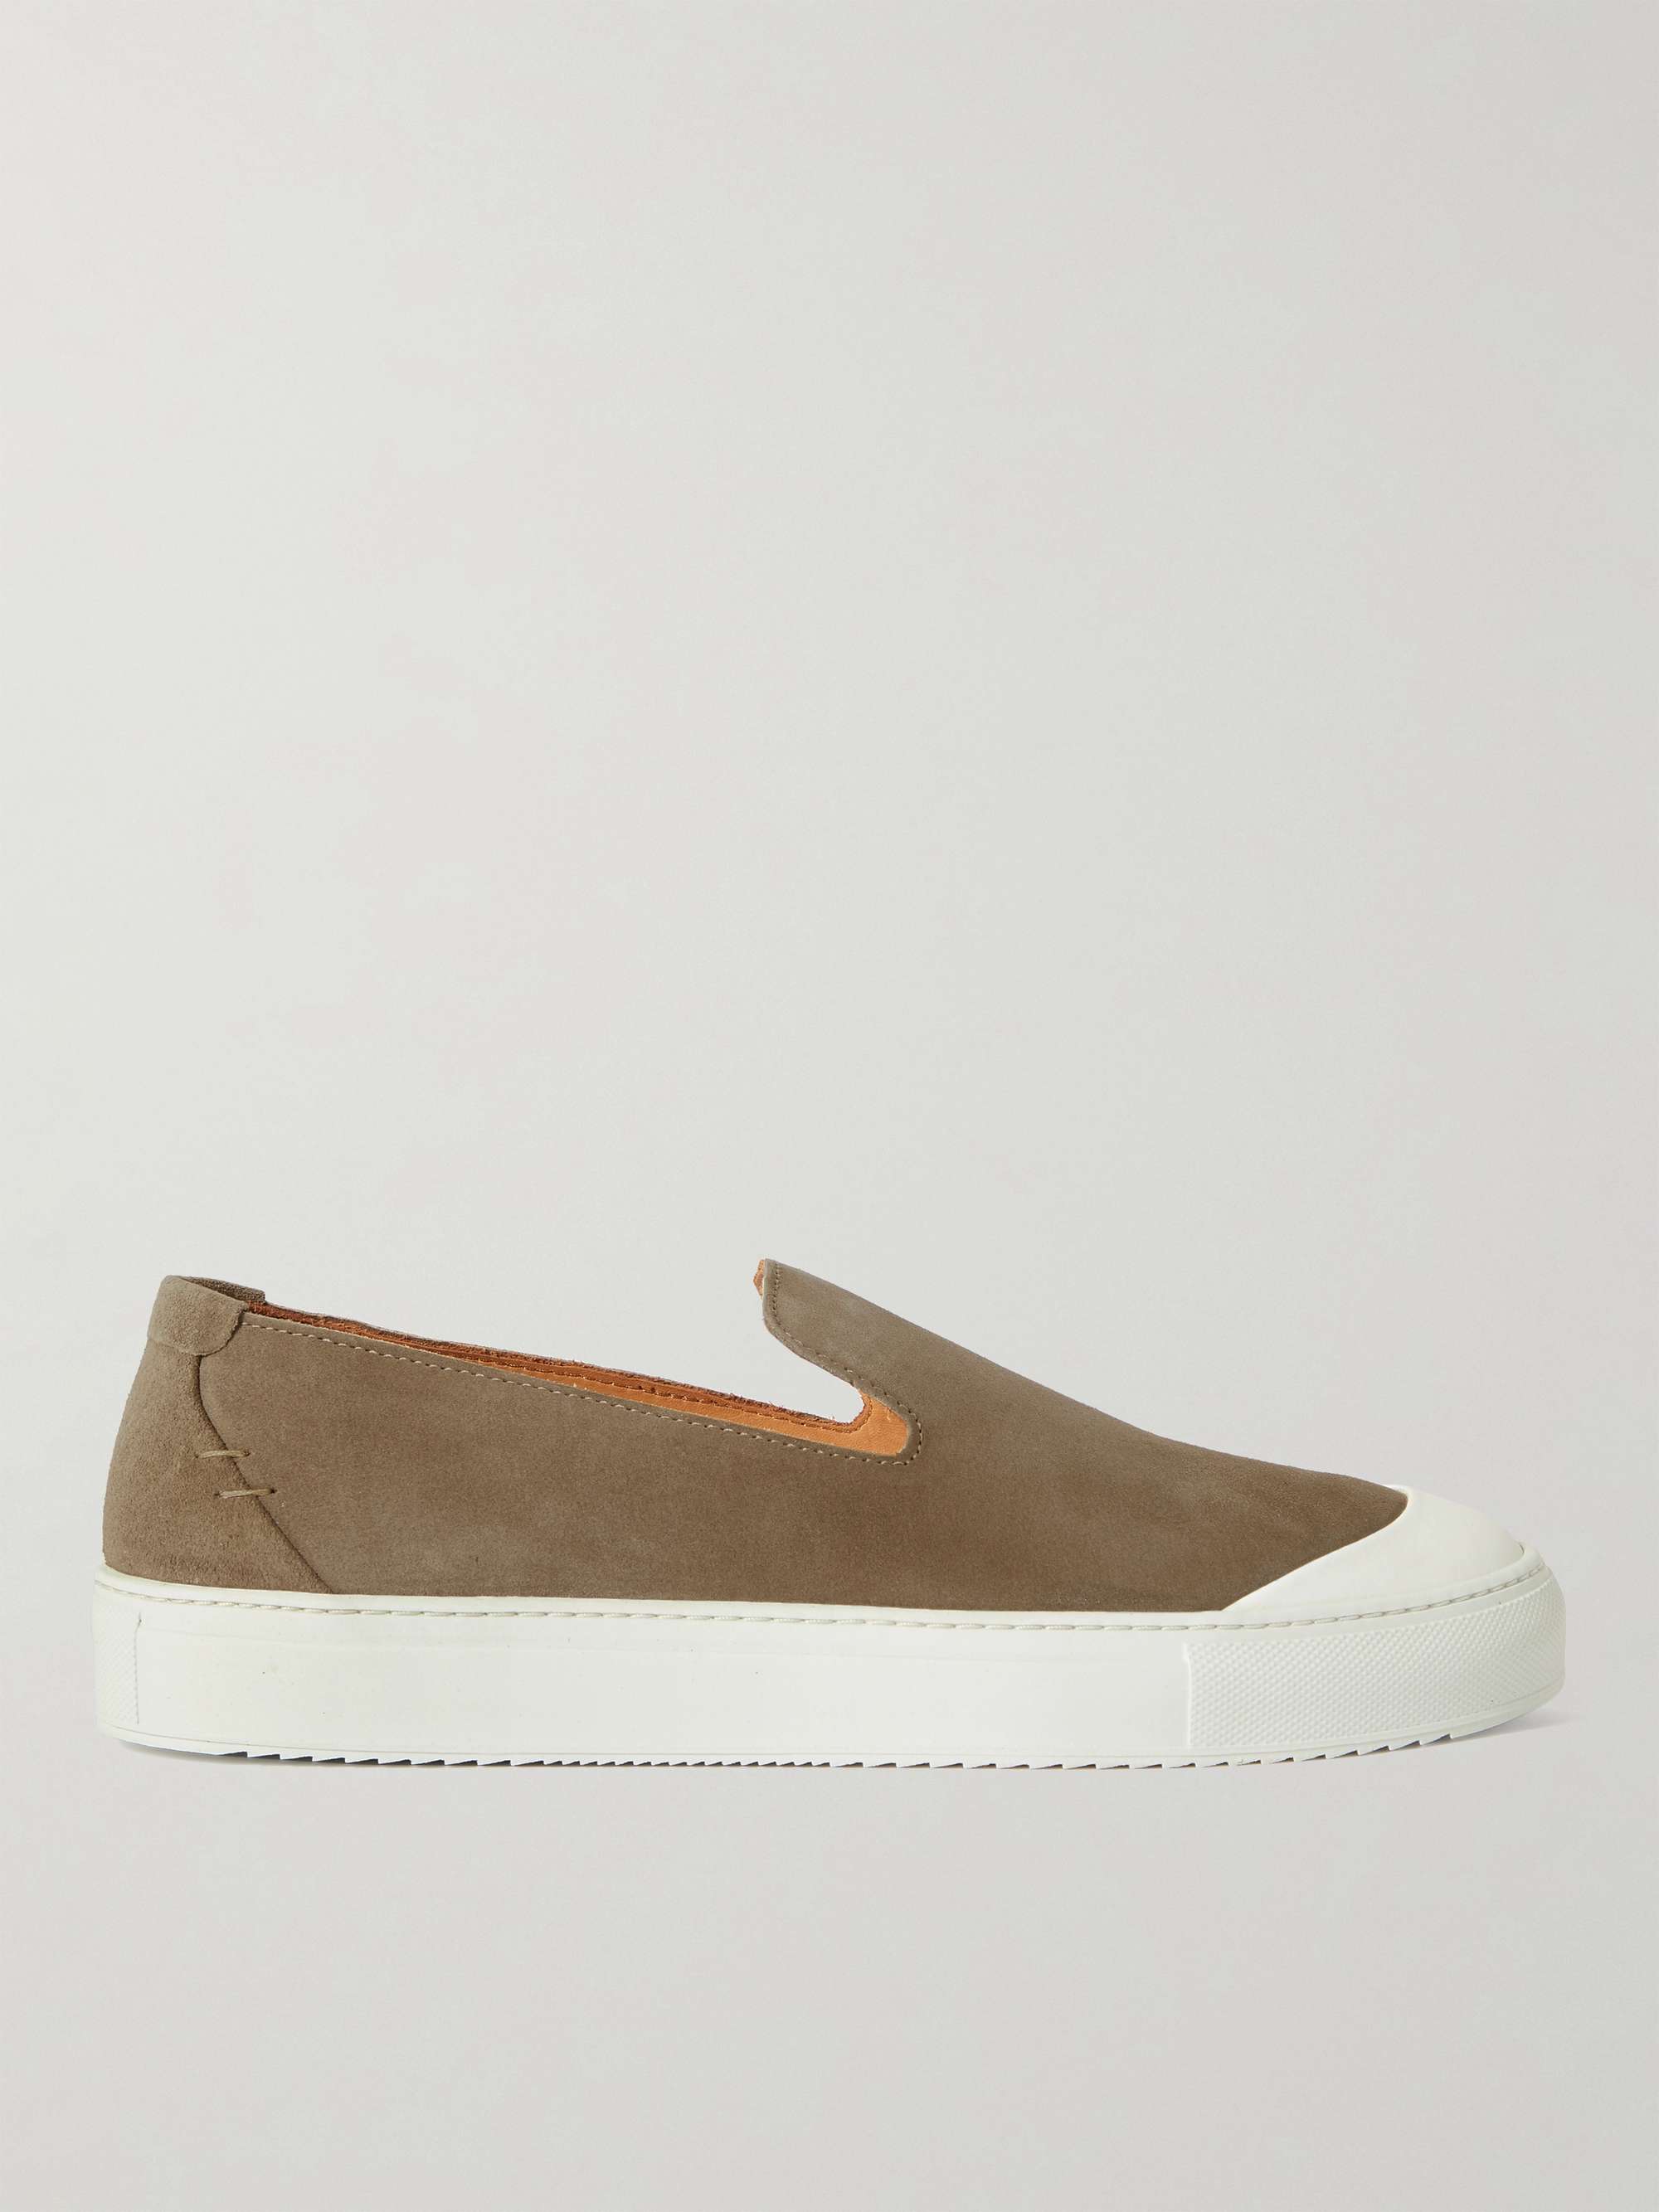 MR P. Larry Regenerated Suede by evolo® Slip-On Sneakers | MR PORTER